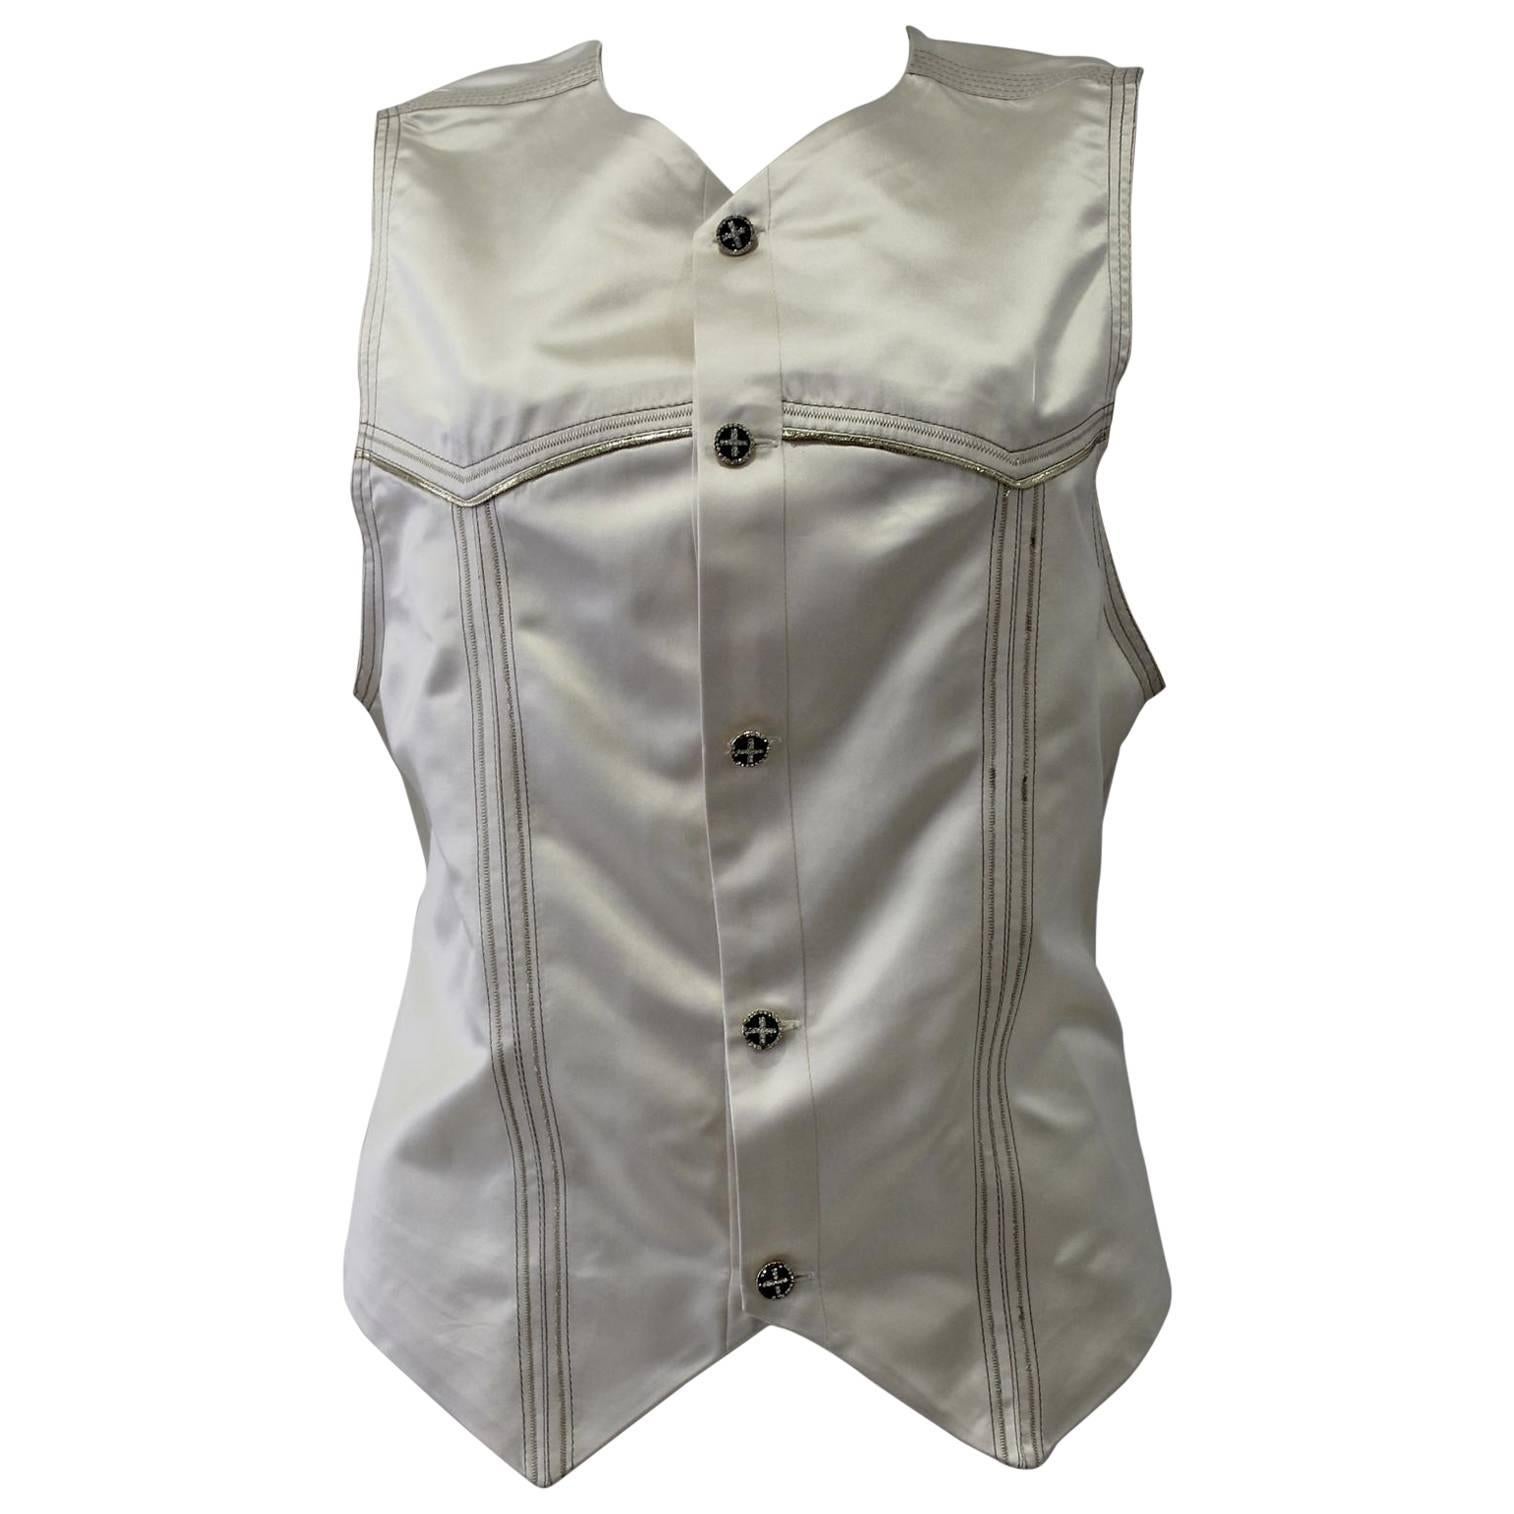 Very Rare Gianni Versace Silk Embroidered Evening Waistcoat Vest Fall 1992 For Sale